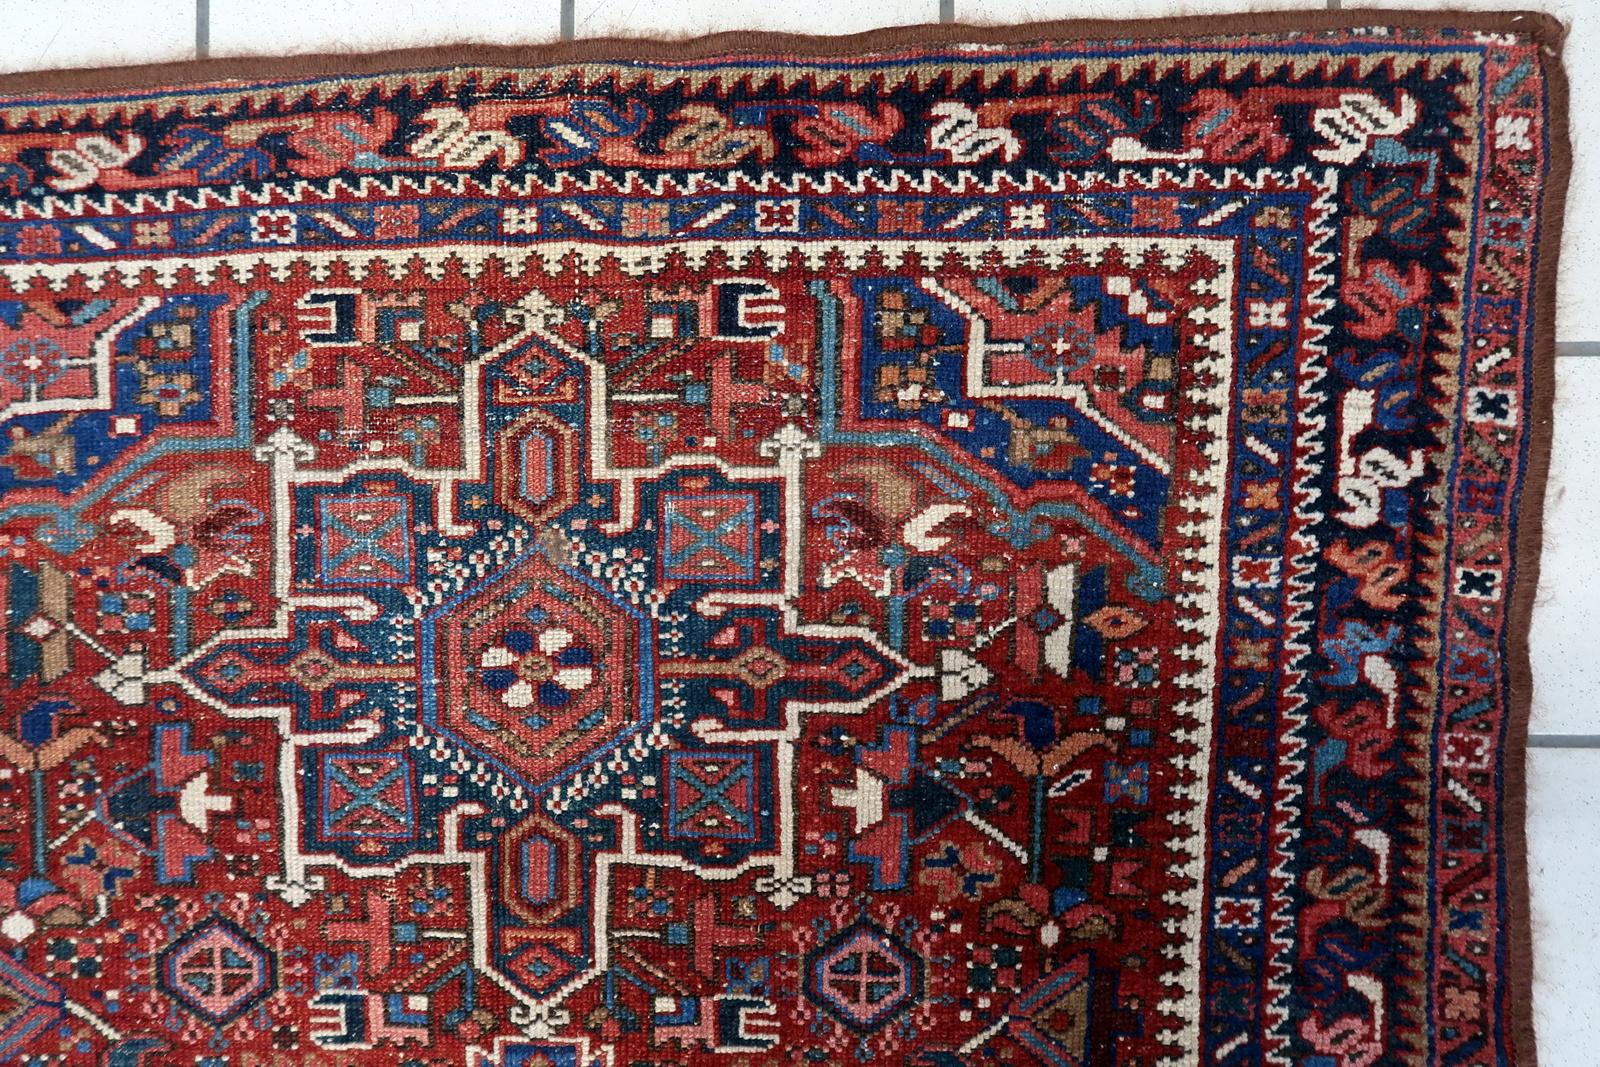 Handmade Antique Persian Hamadan Rug you’ve shared:

Design and Colors:
This rug boasts an intricate design that reflects its rich heritage. The symmetrical patterns and geometric motifs are a testament to the craftsmanship of its Persian